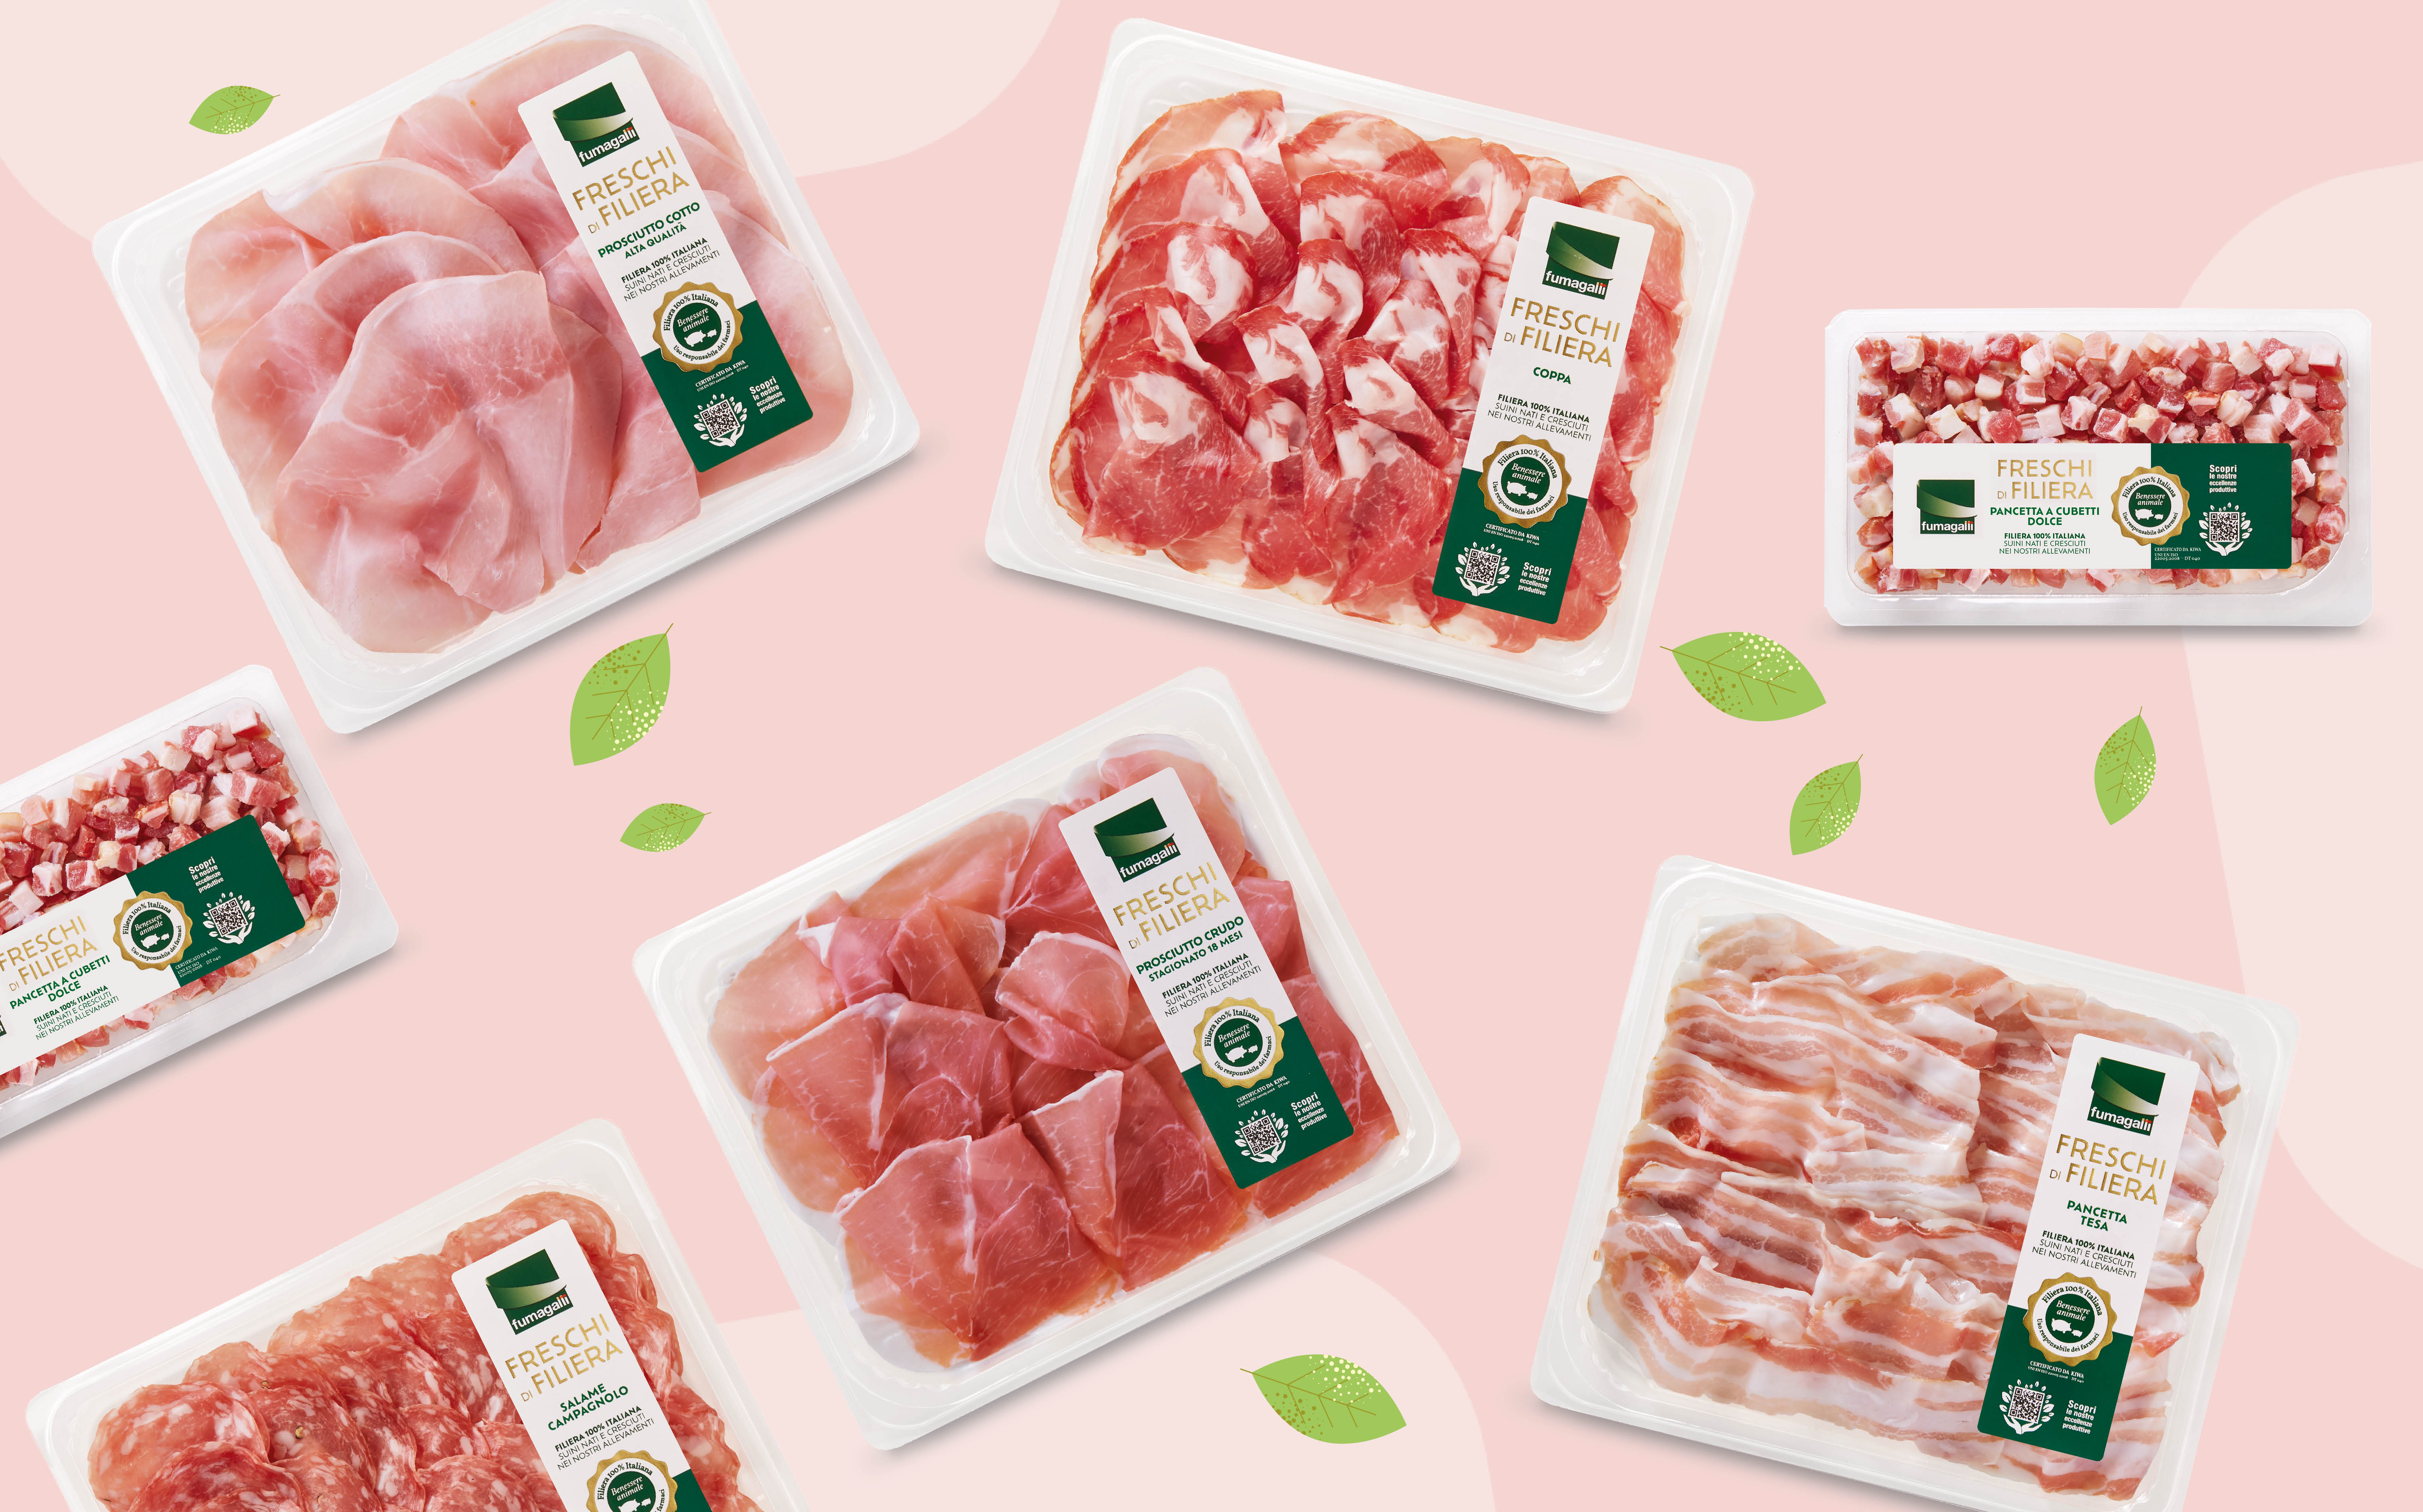 The packaging of Fumagalli Freschi di Filiera stresses the sliced product and a QR code is shown on the front of pack